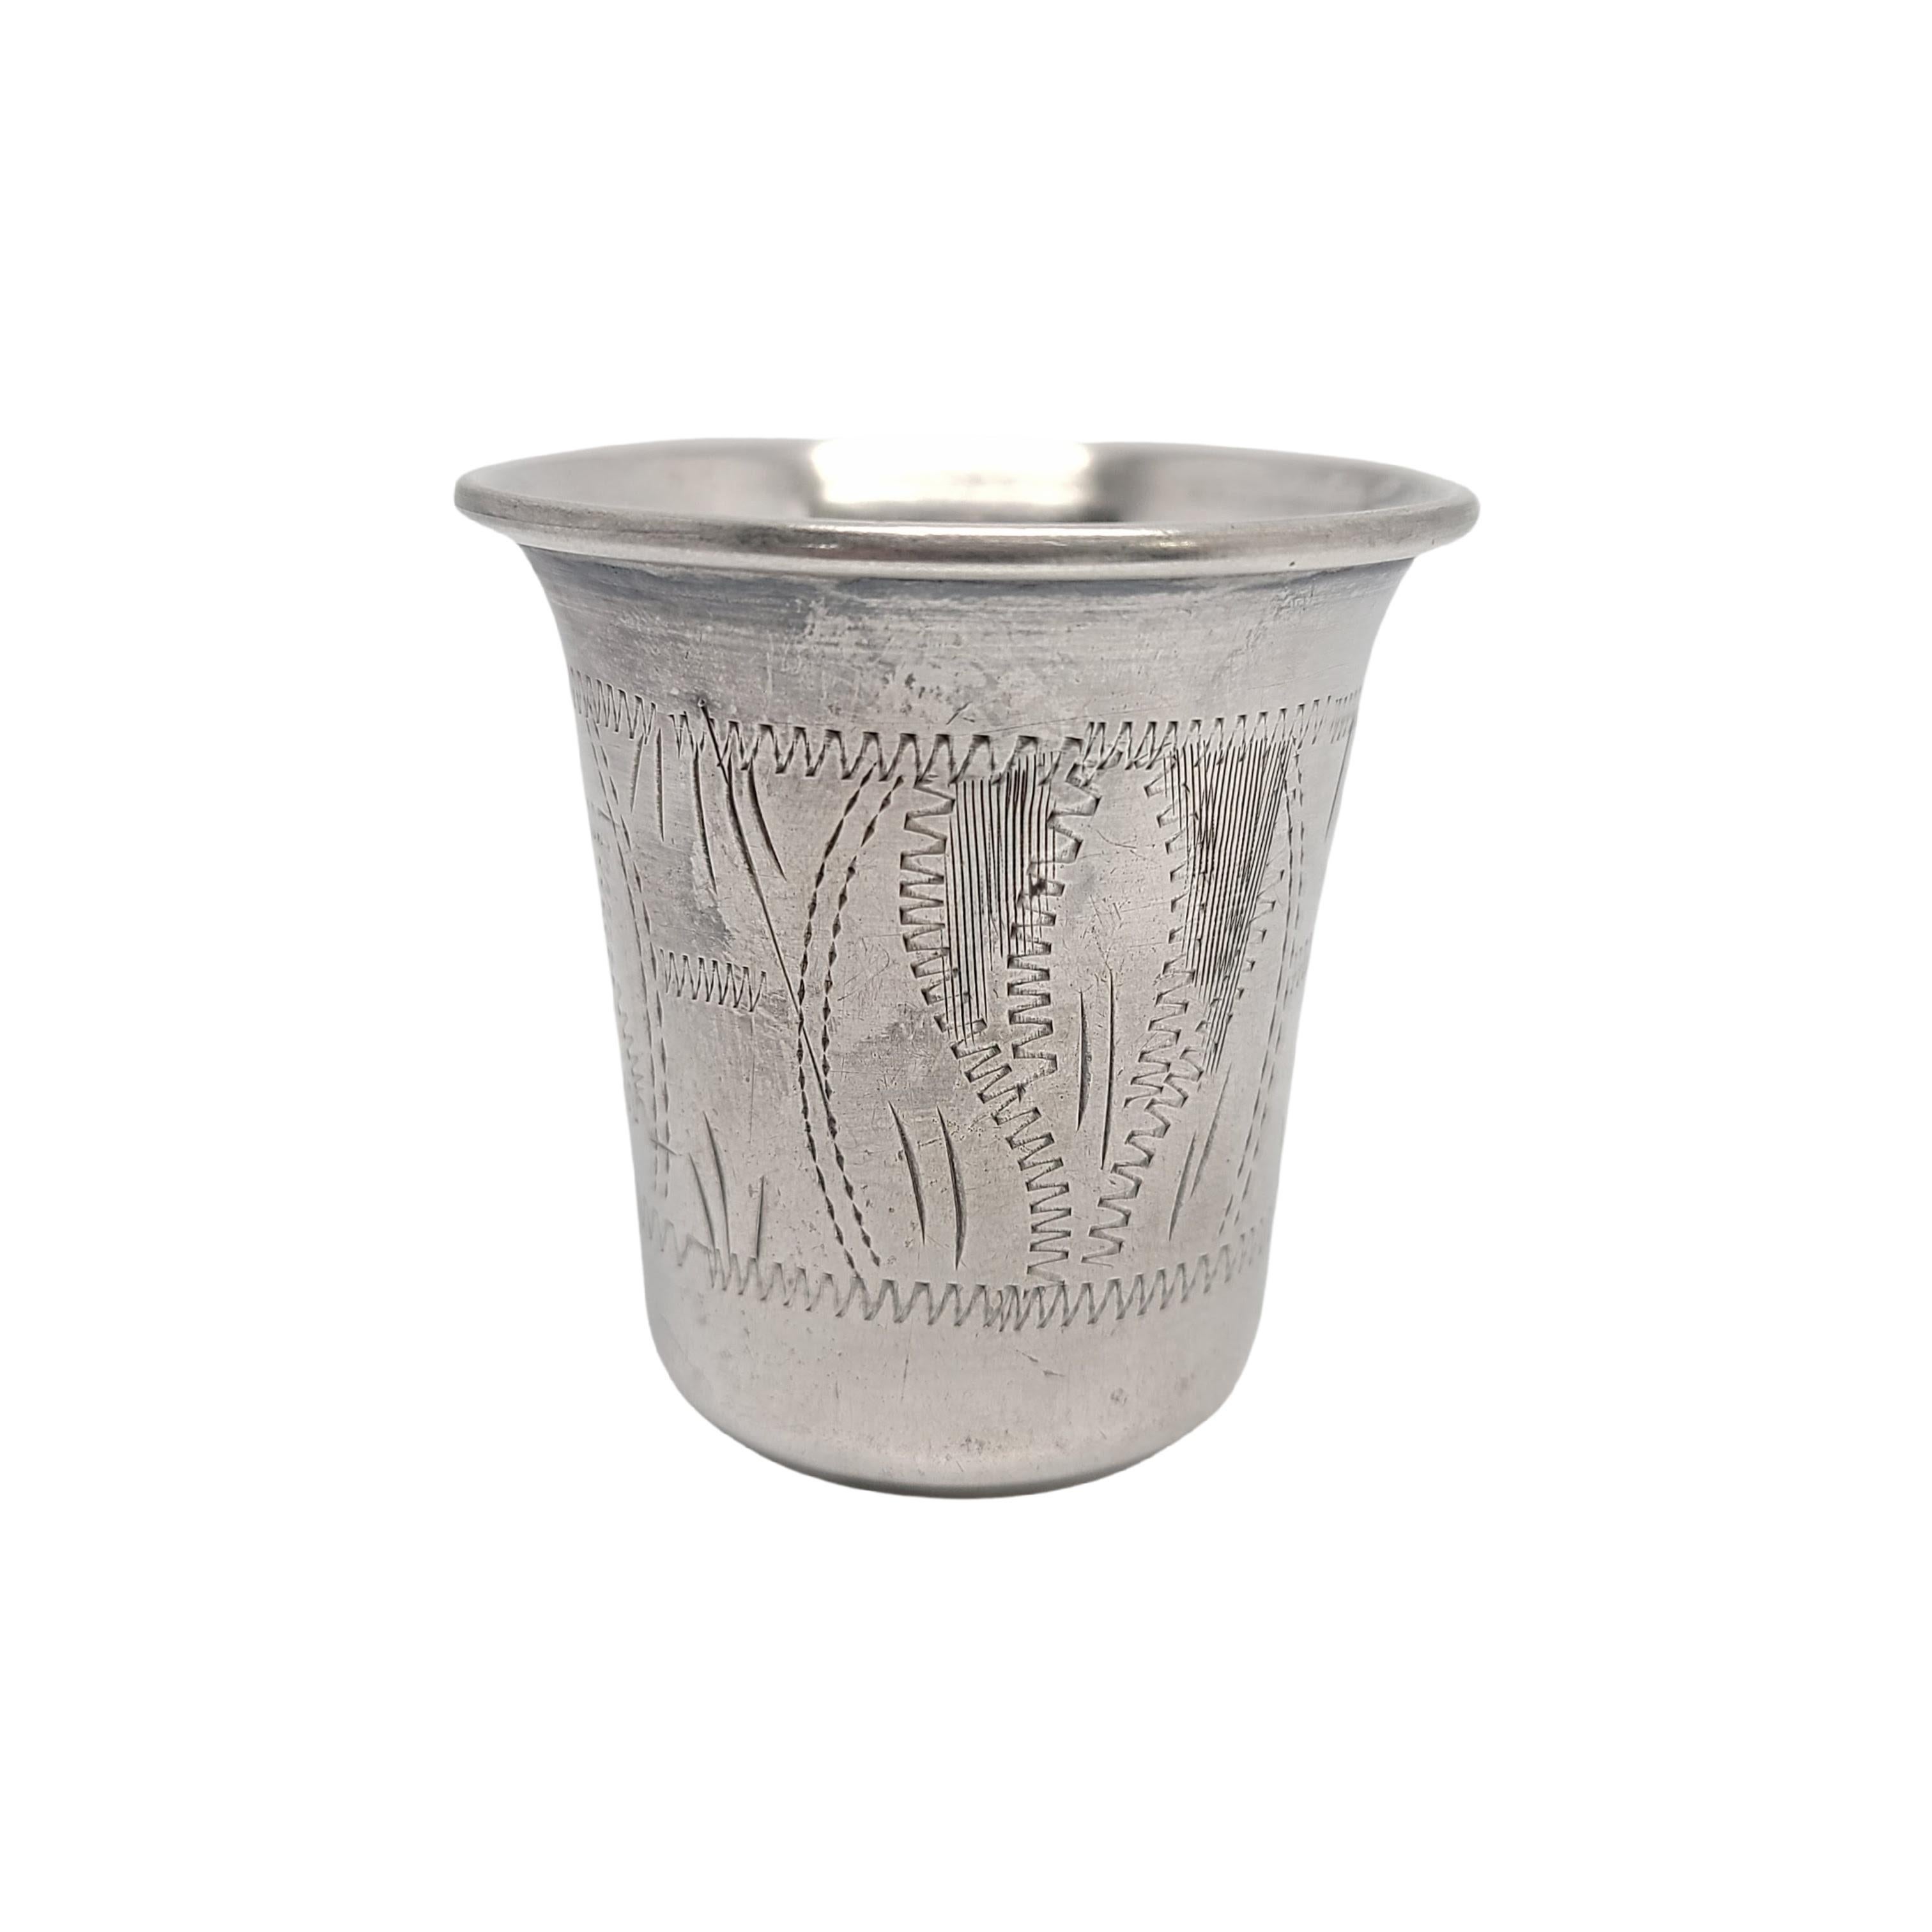 Vintage sterling silver kiddush cup.

Beautiful bright cut etched design featuring a Star of David.

Measures 1 5/8